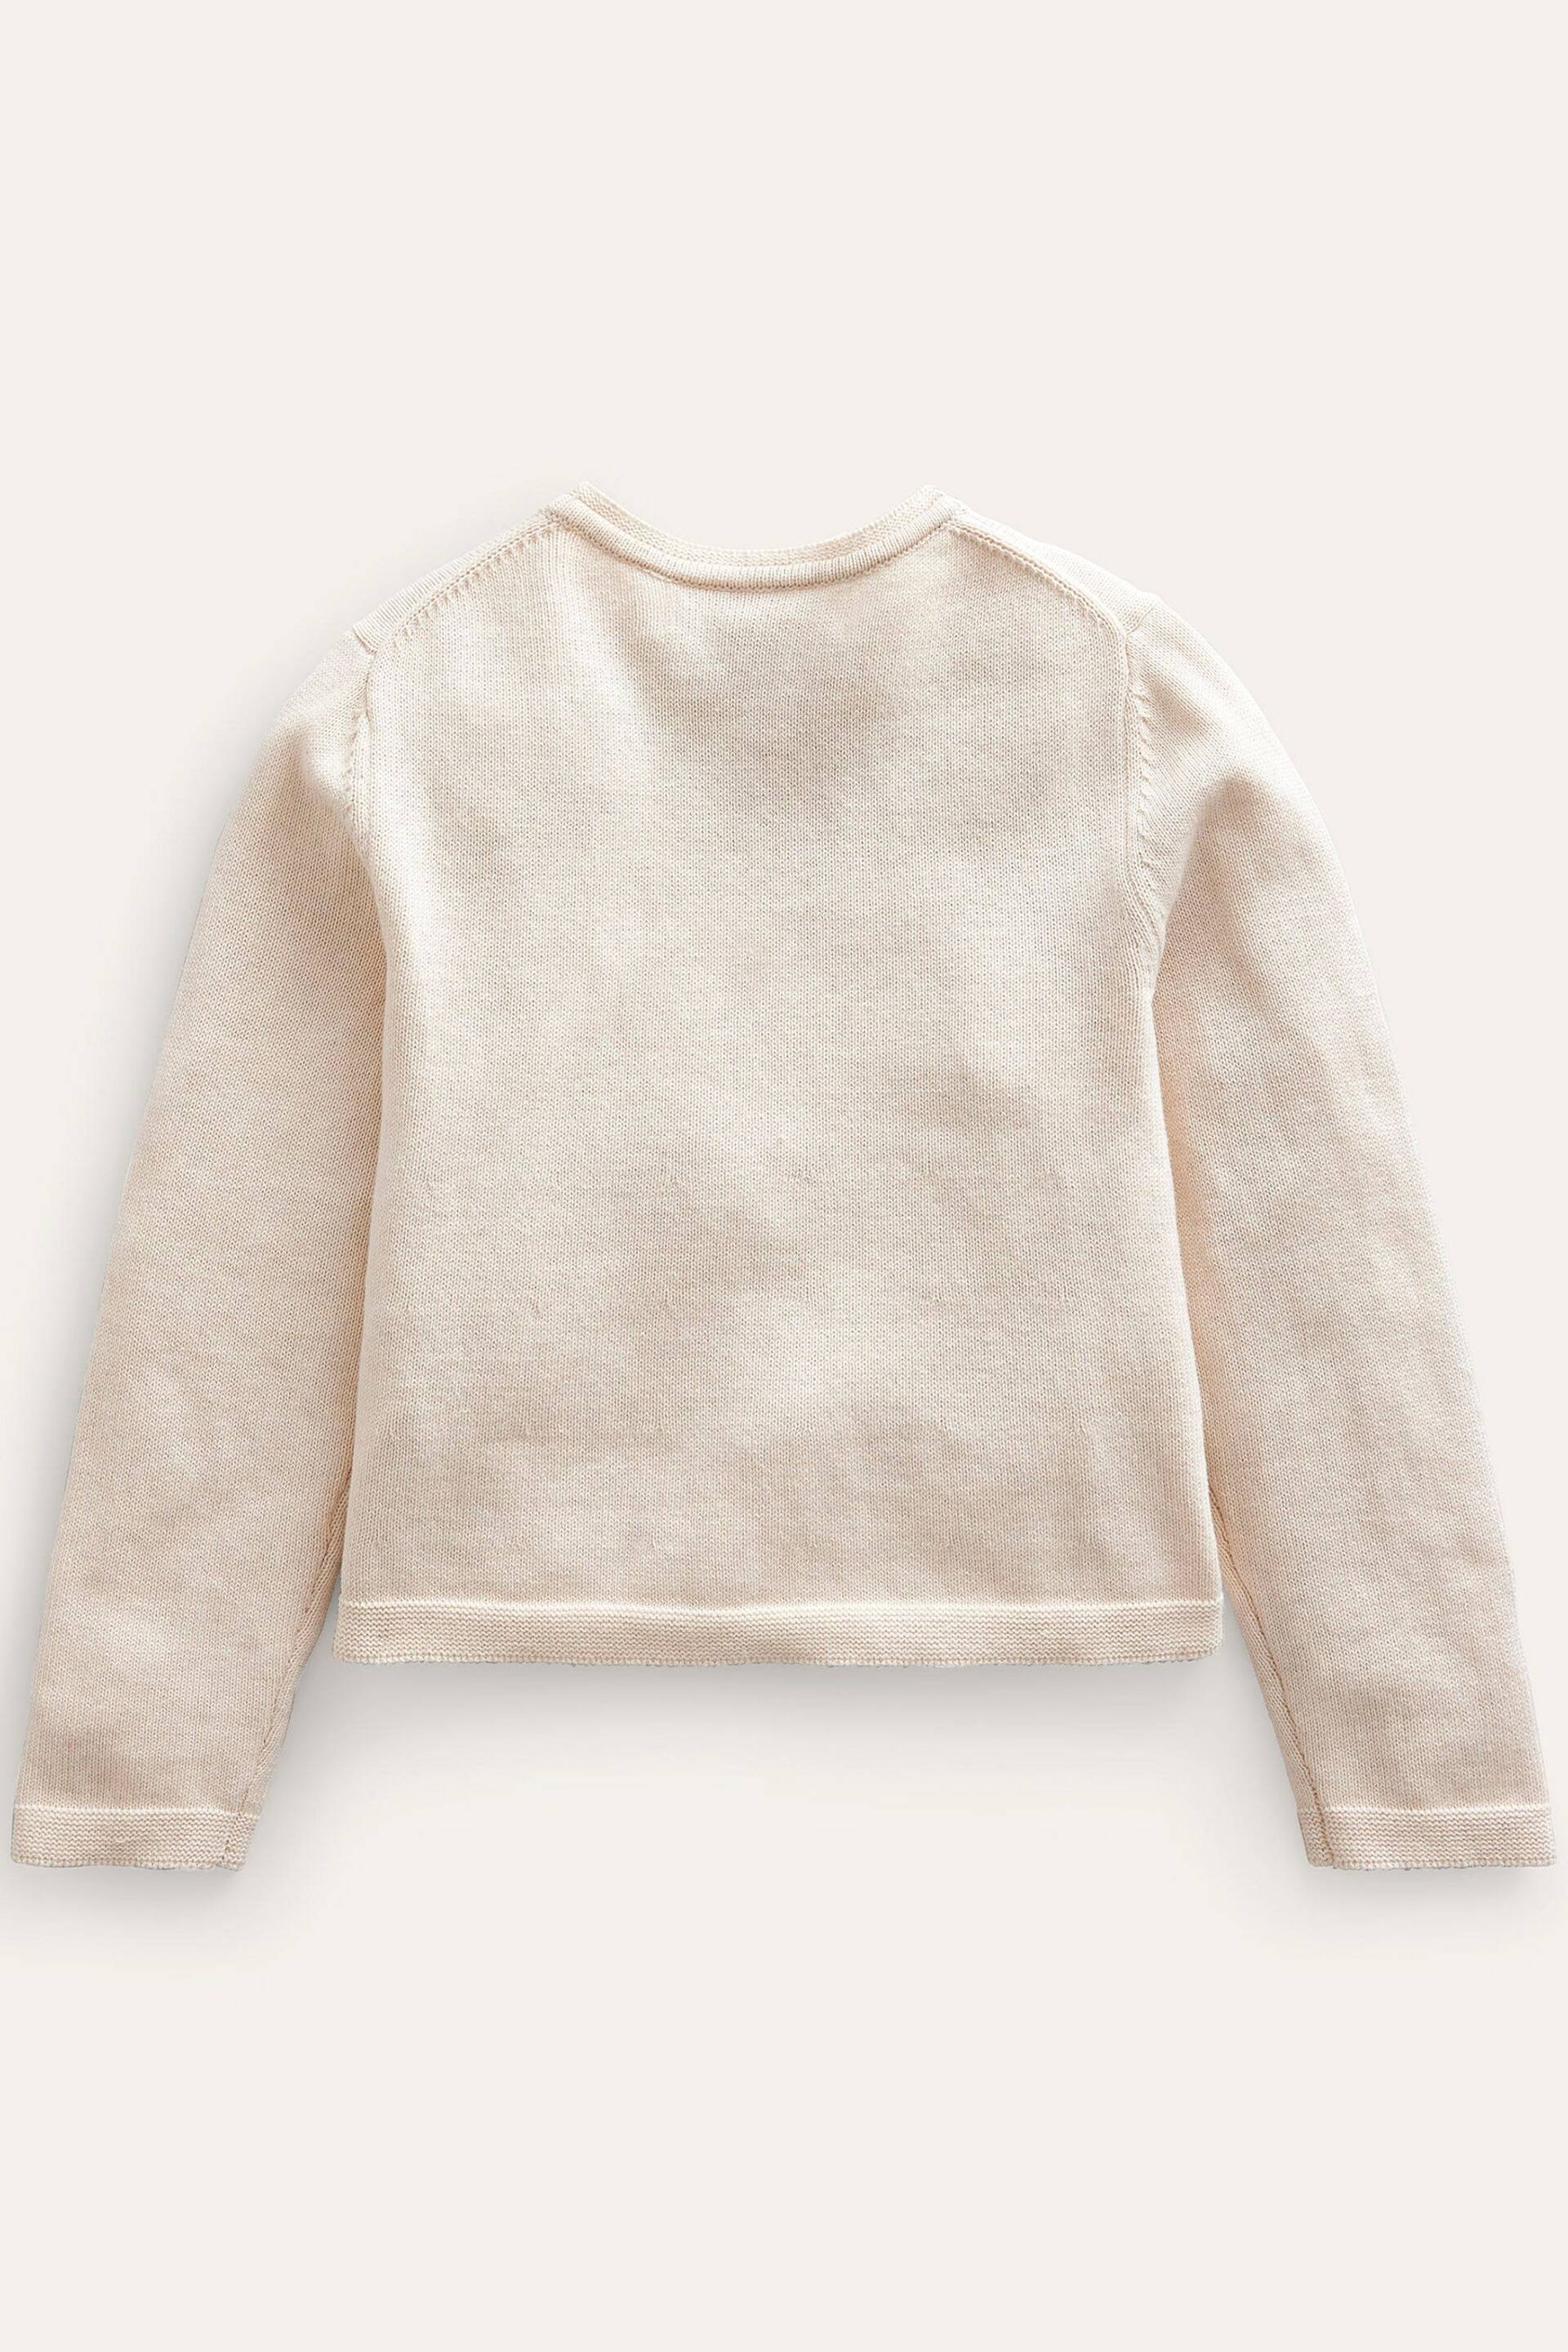 Boden Natural Pointelle Cotton Cardigan - Image 2 of 3